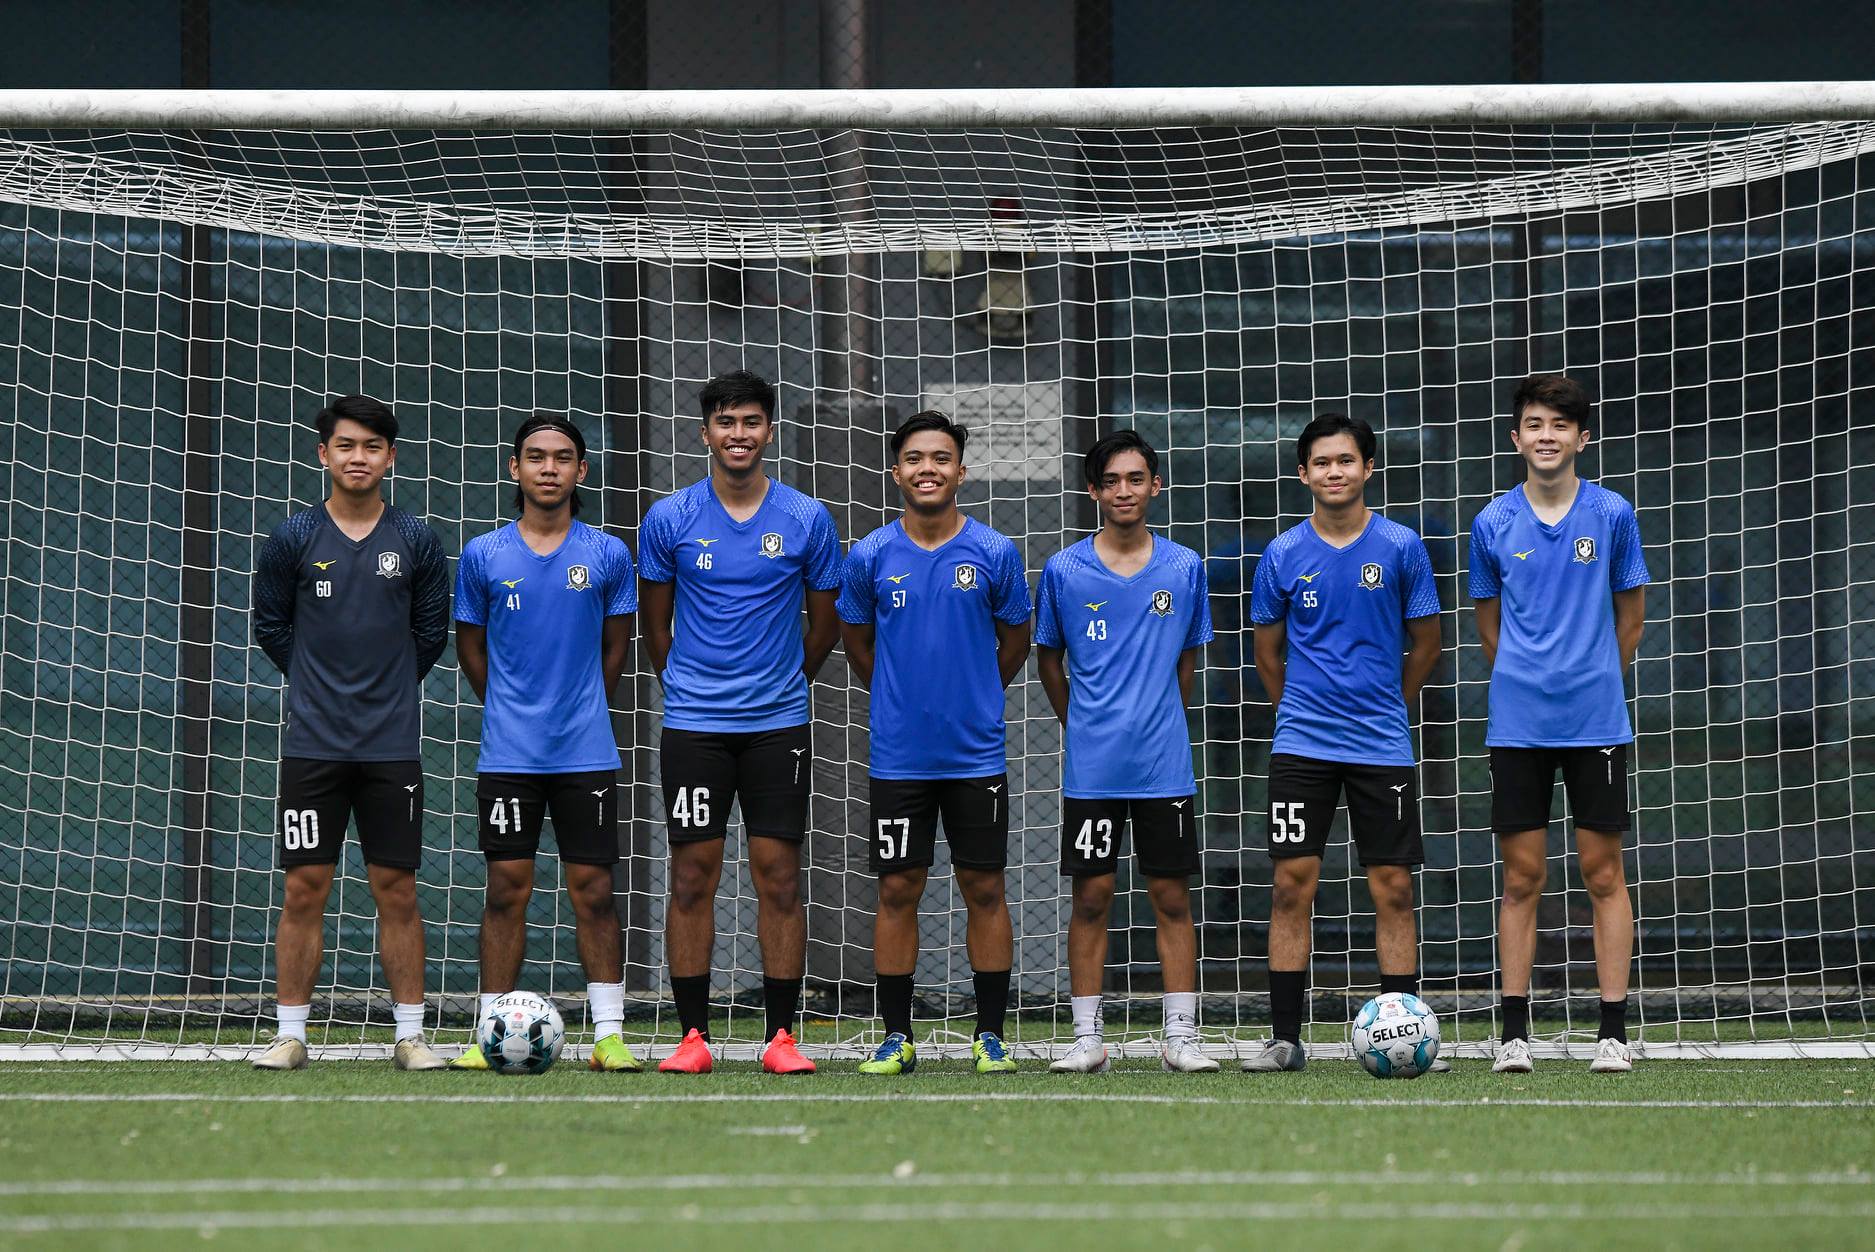 Youth Prospects Dylan Christopher Goh , Aqmal Jelany, Haziq Jalal, Adam Reefdy, Amir Mirza, Ethan Pinto and Christopher Ong from TRFC's COE team